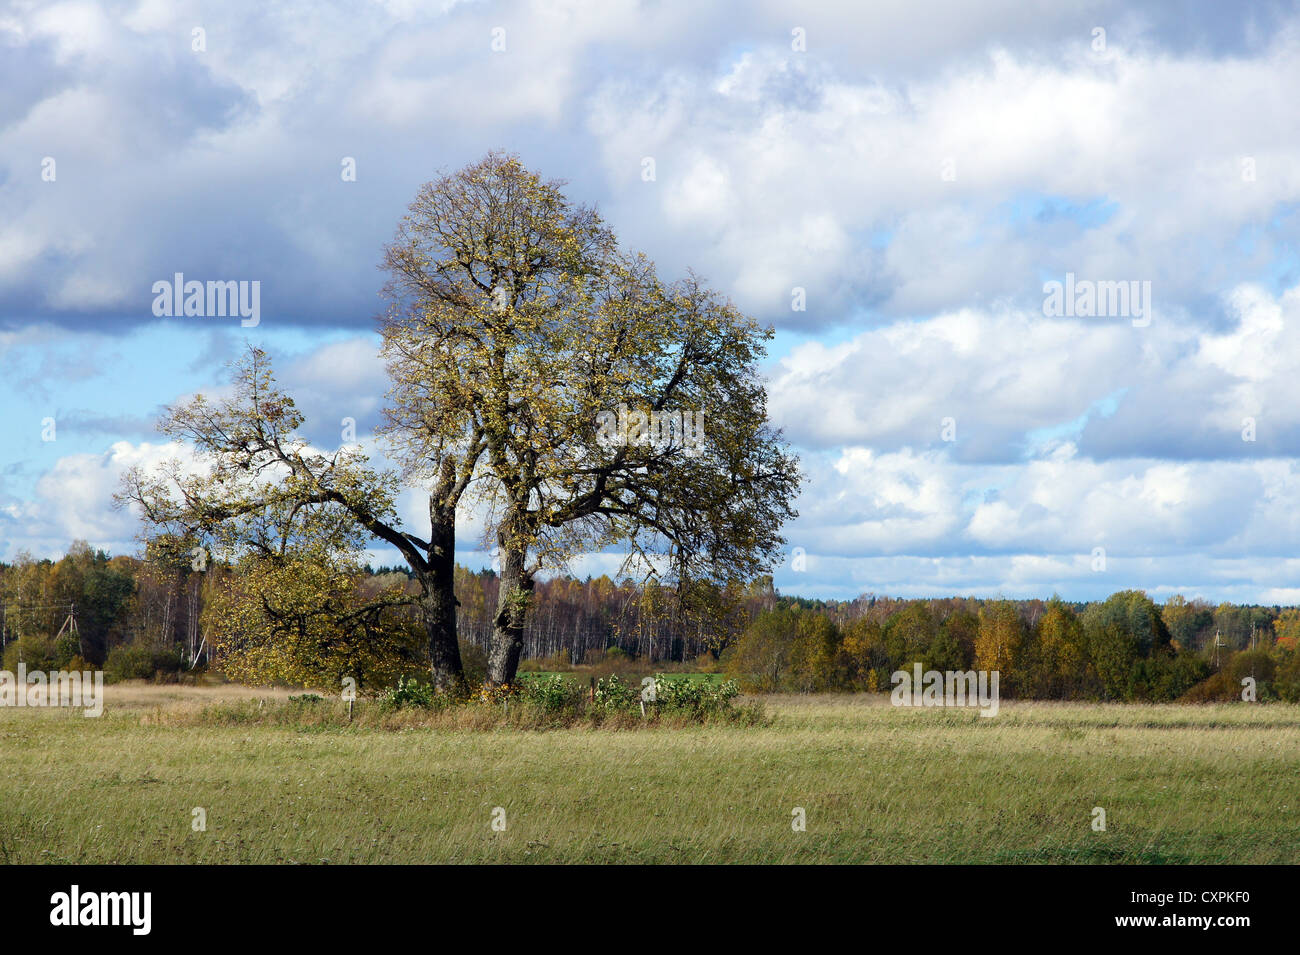 Tree against sky in a natural environment Stock Photo